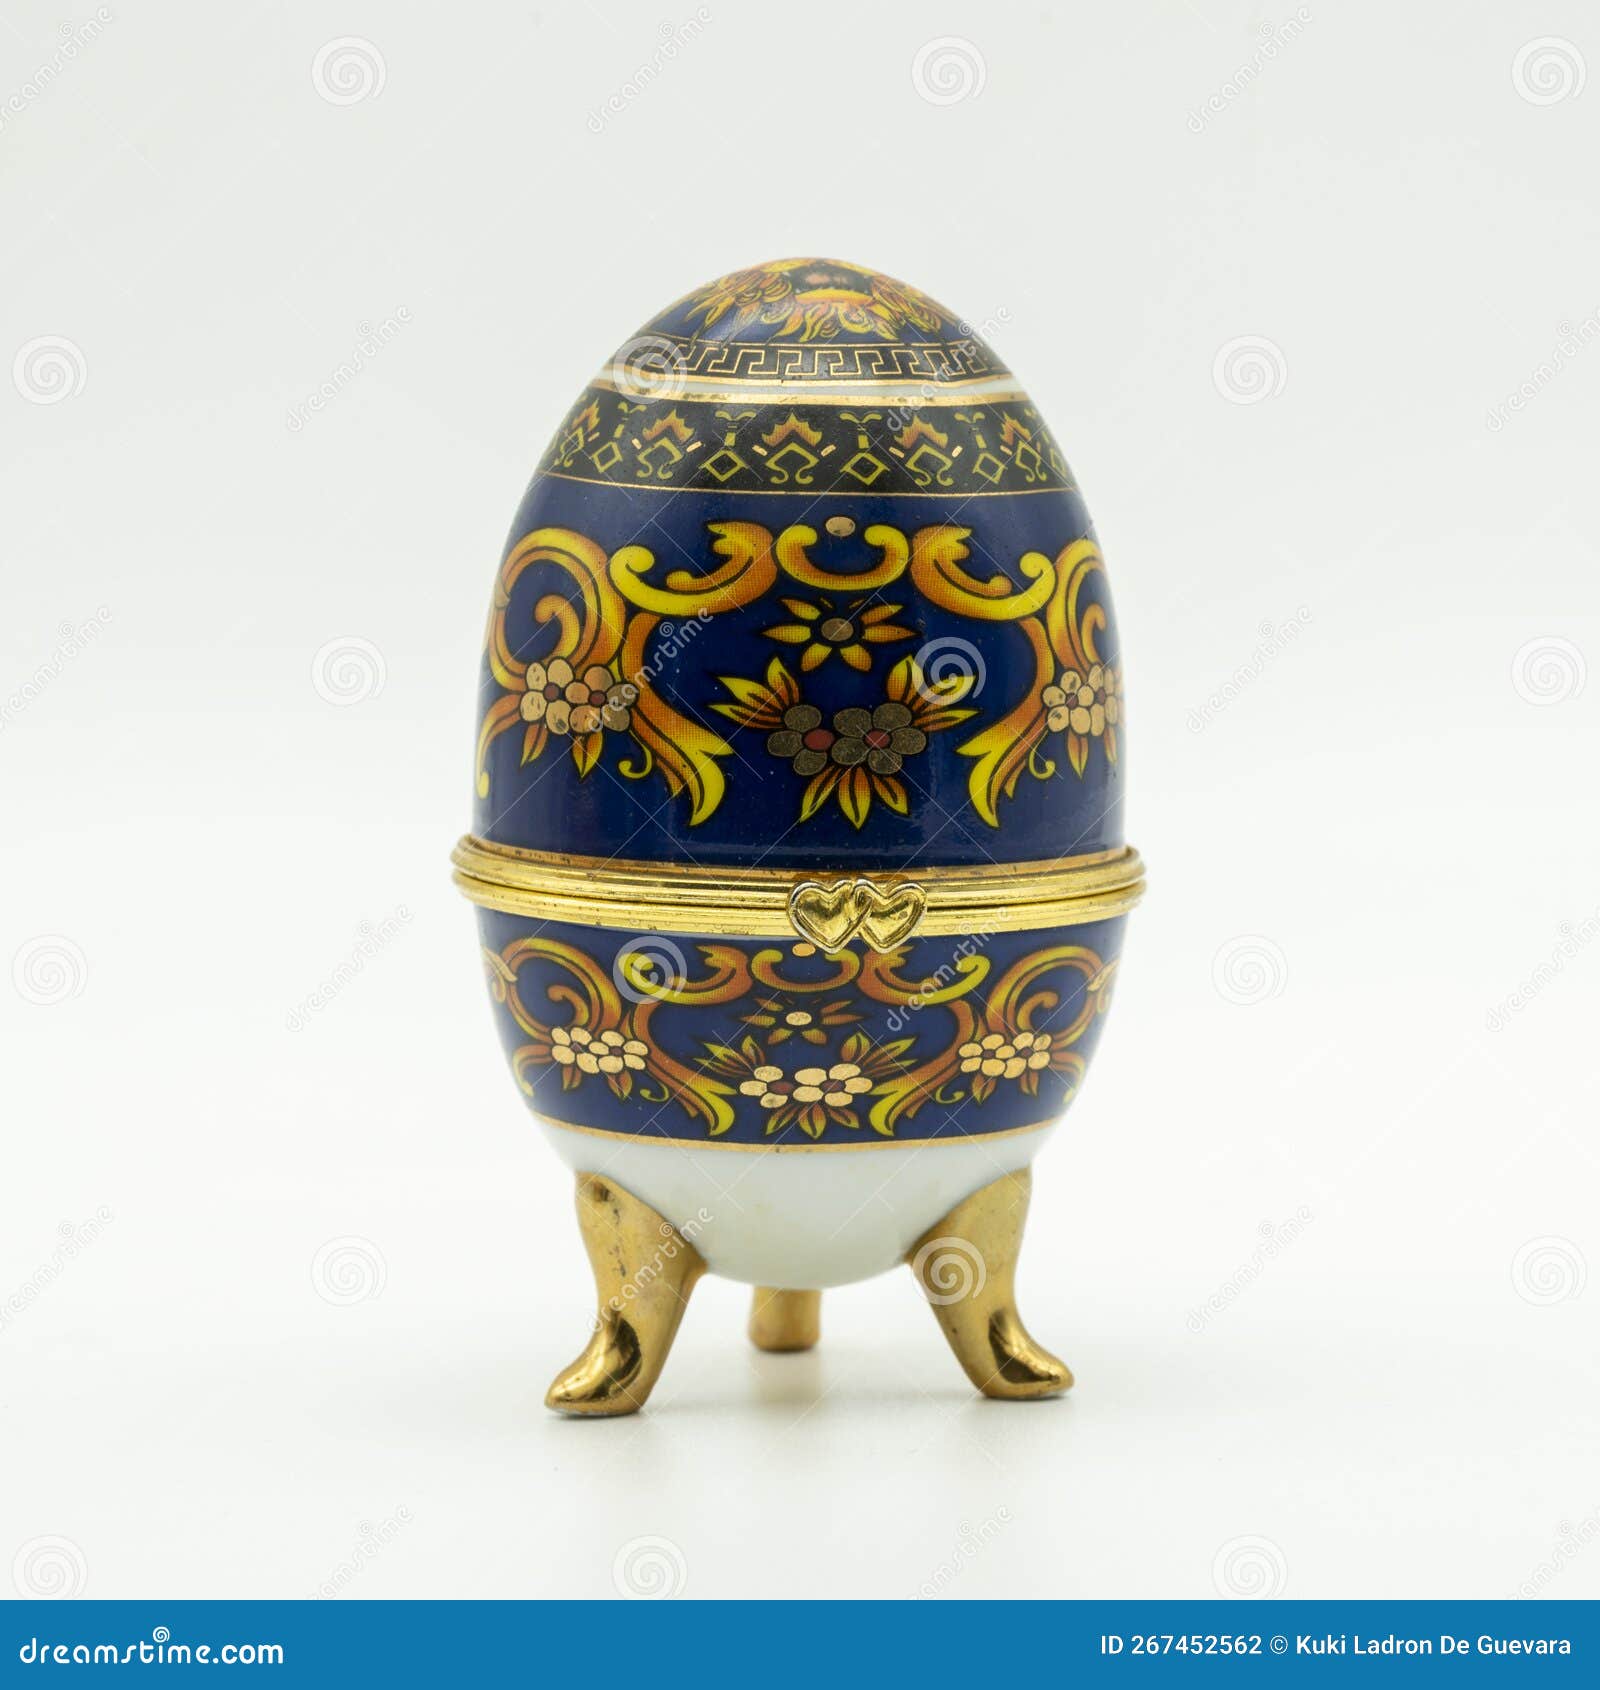 russian typical decorated eggs